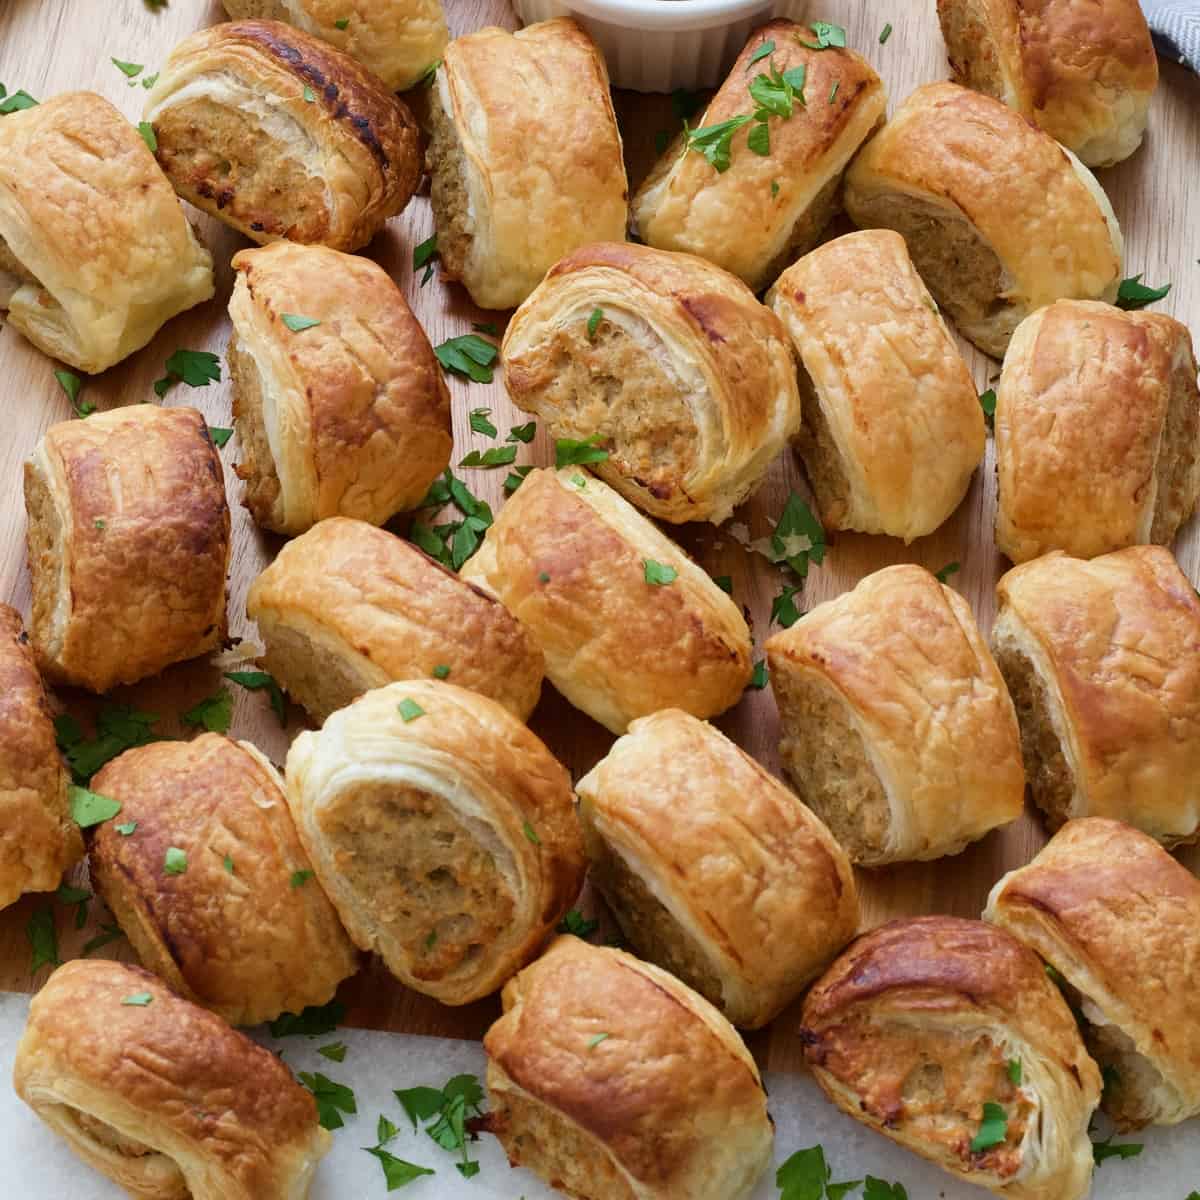 Small sausage rolls on the board sprinkled with fresh parsley.